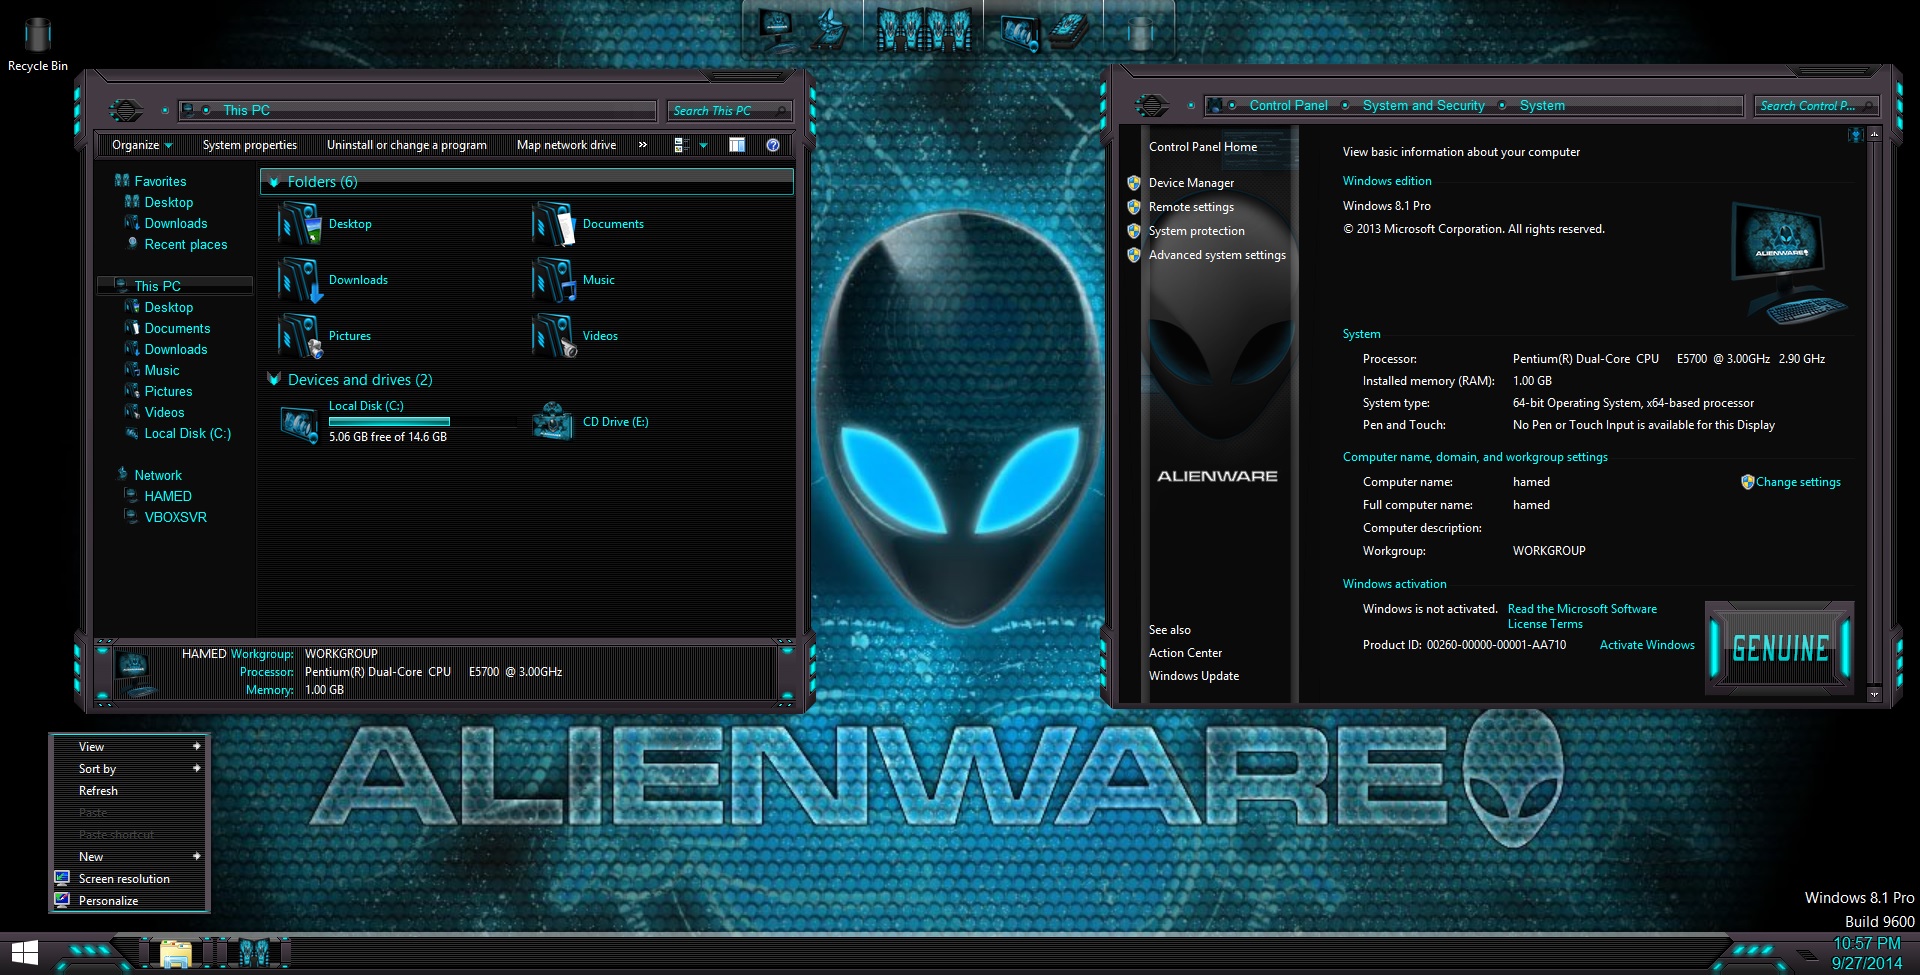 Discovery theme for Win7/8/8.1